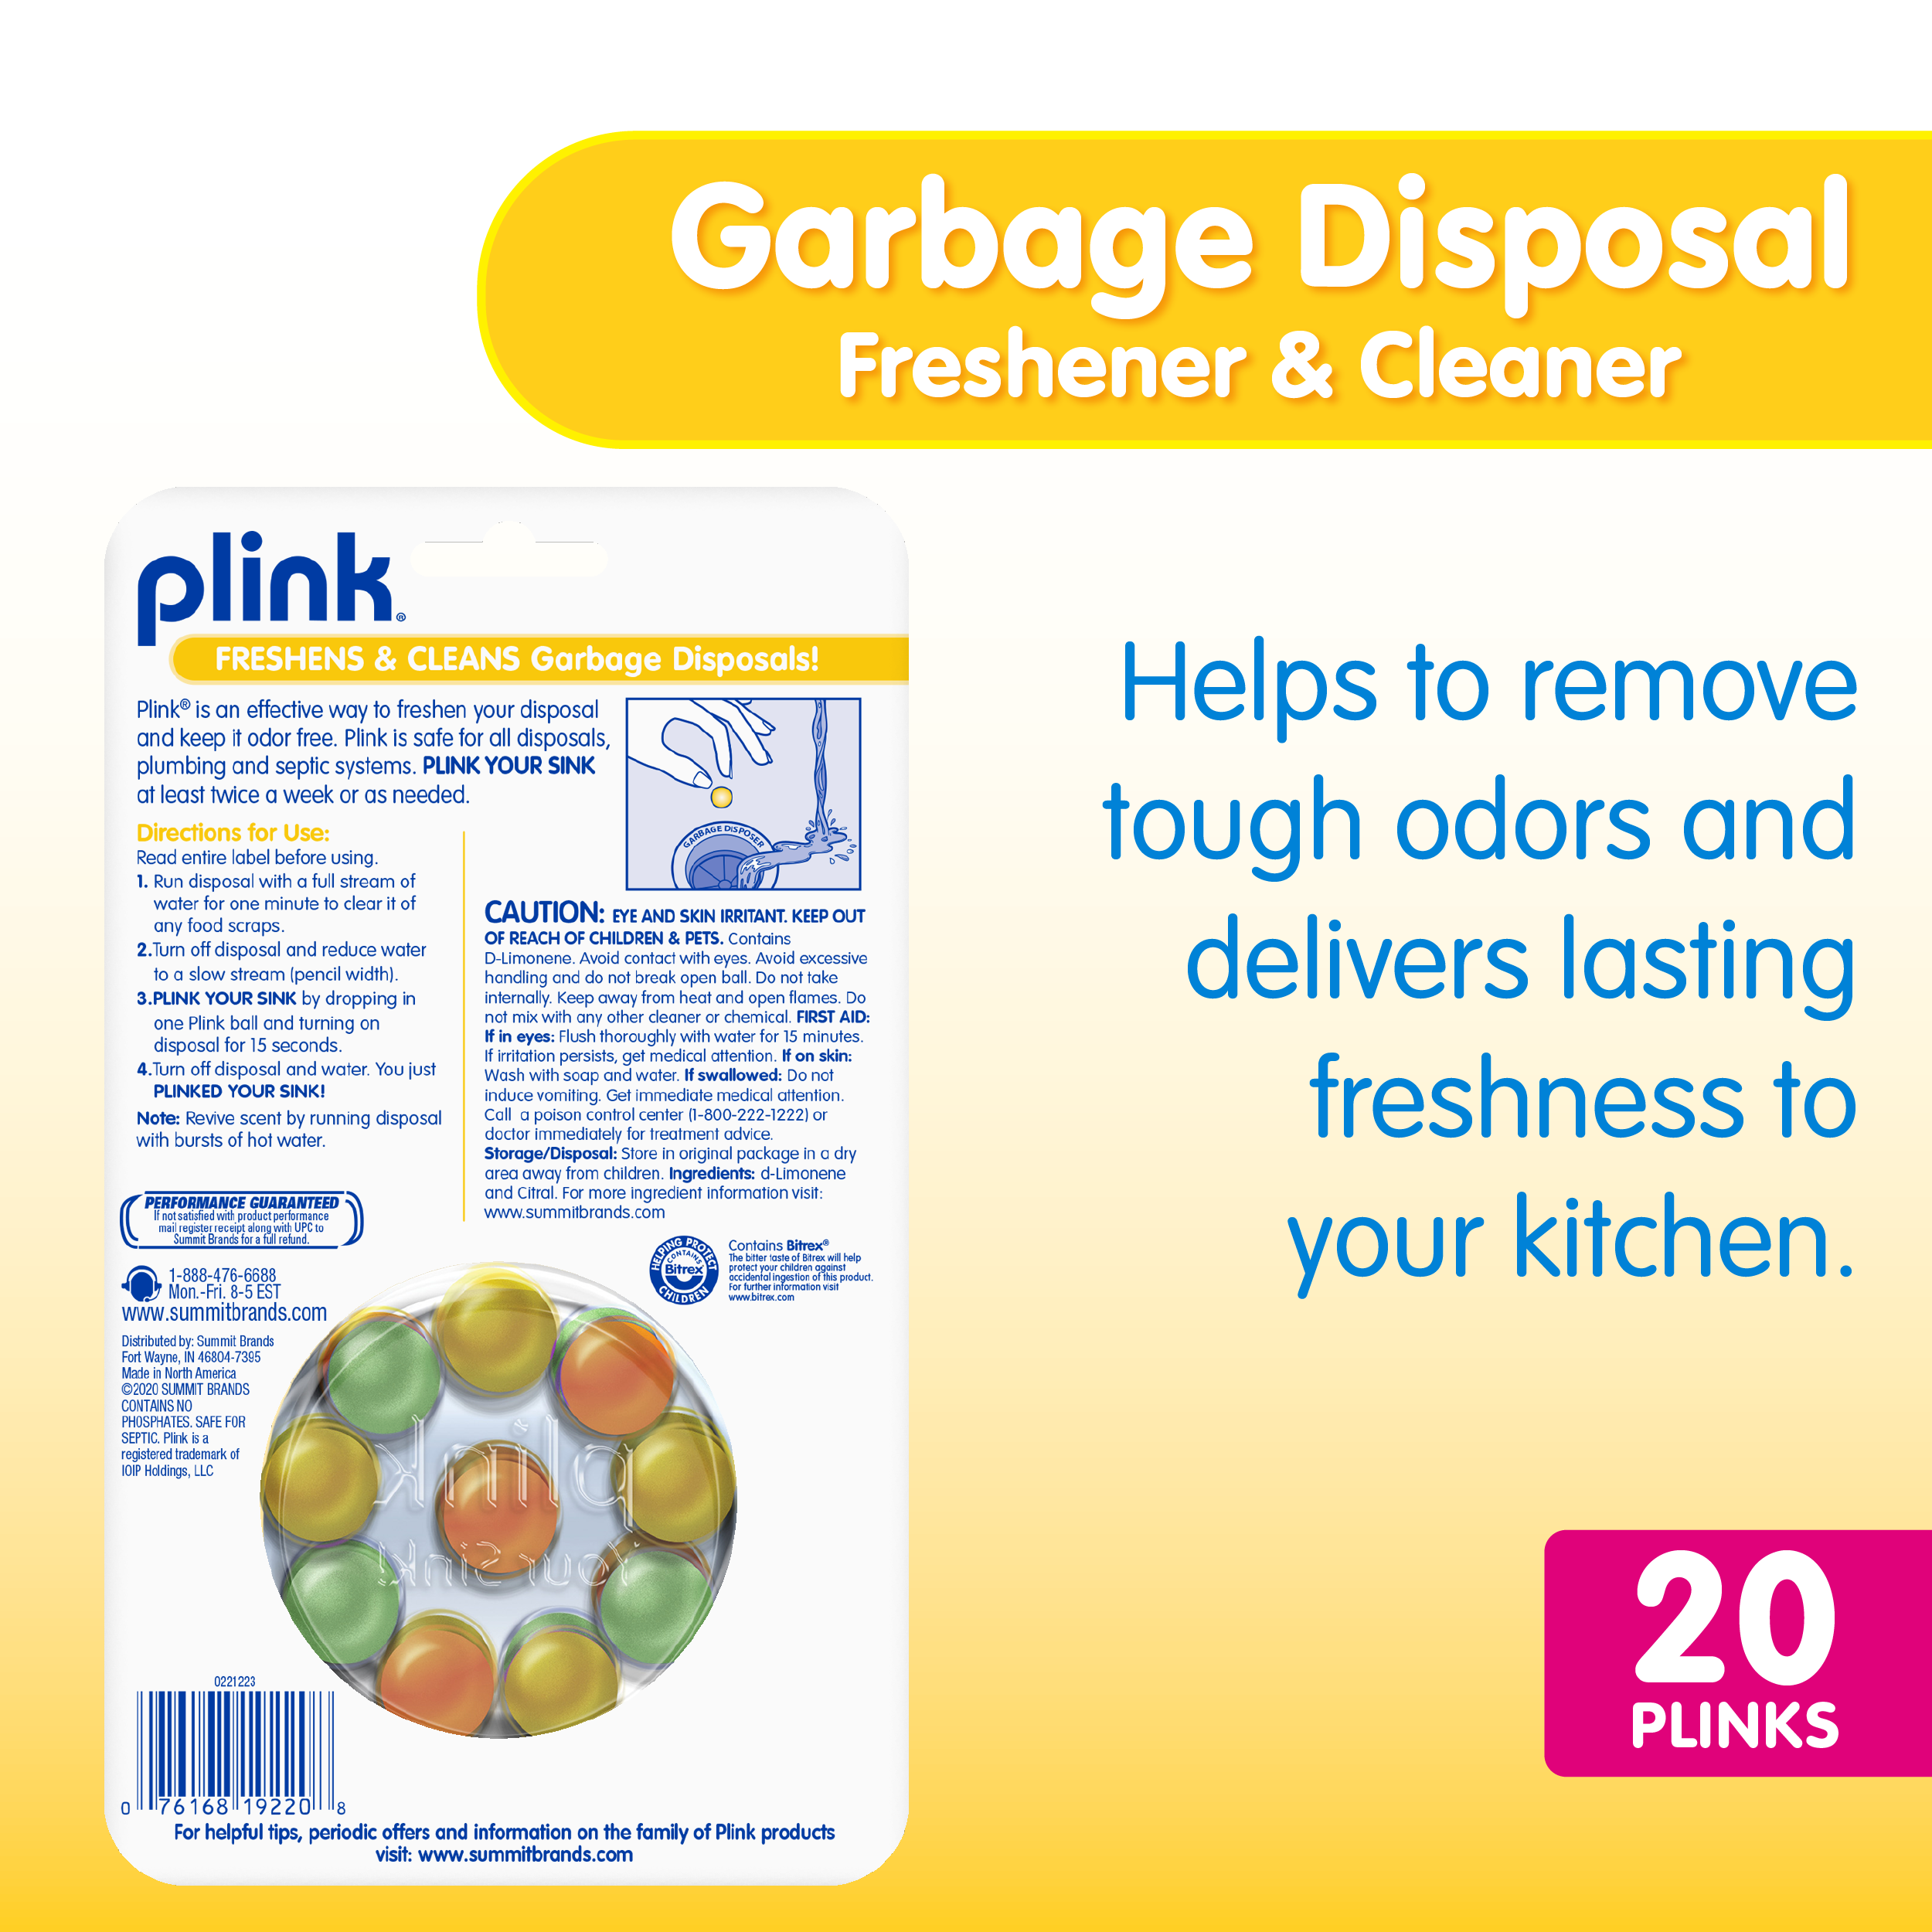 How to clean a garbage disposal and how often to do it - TODAY